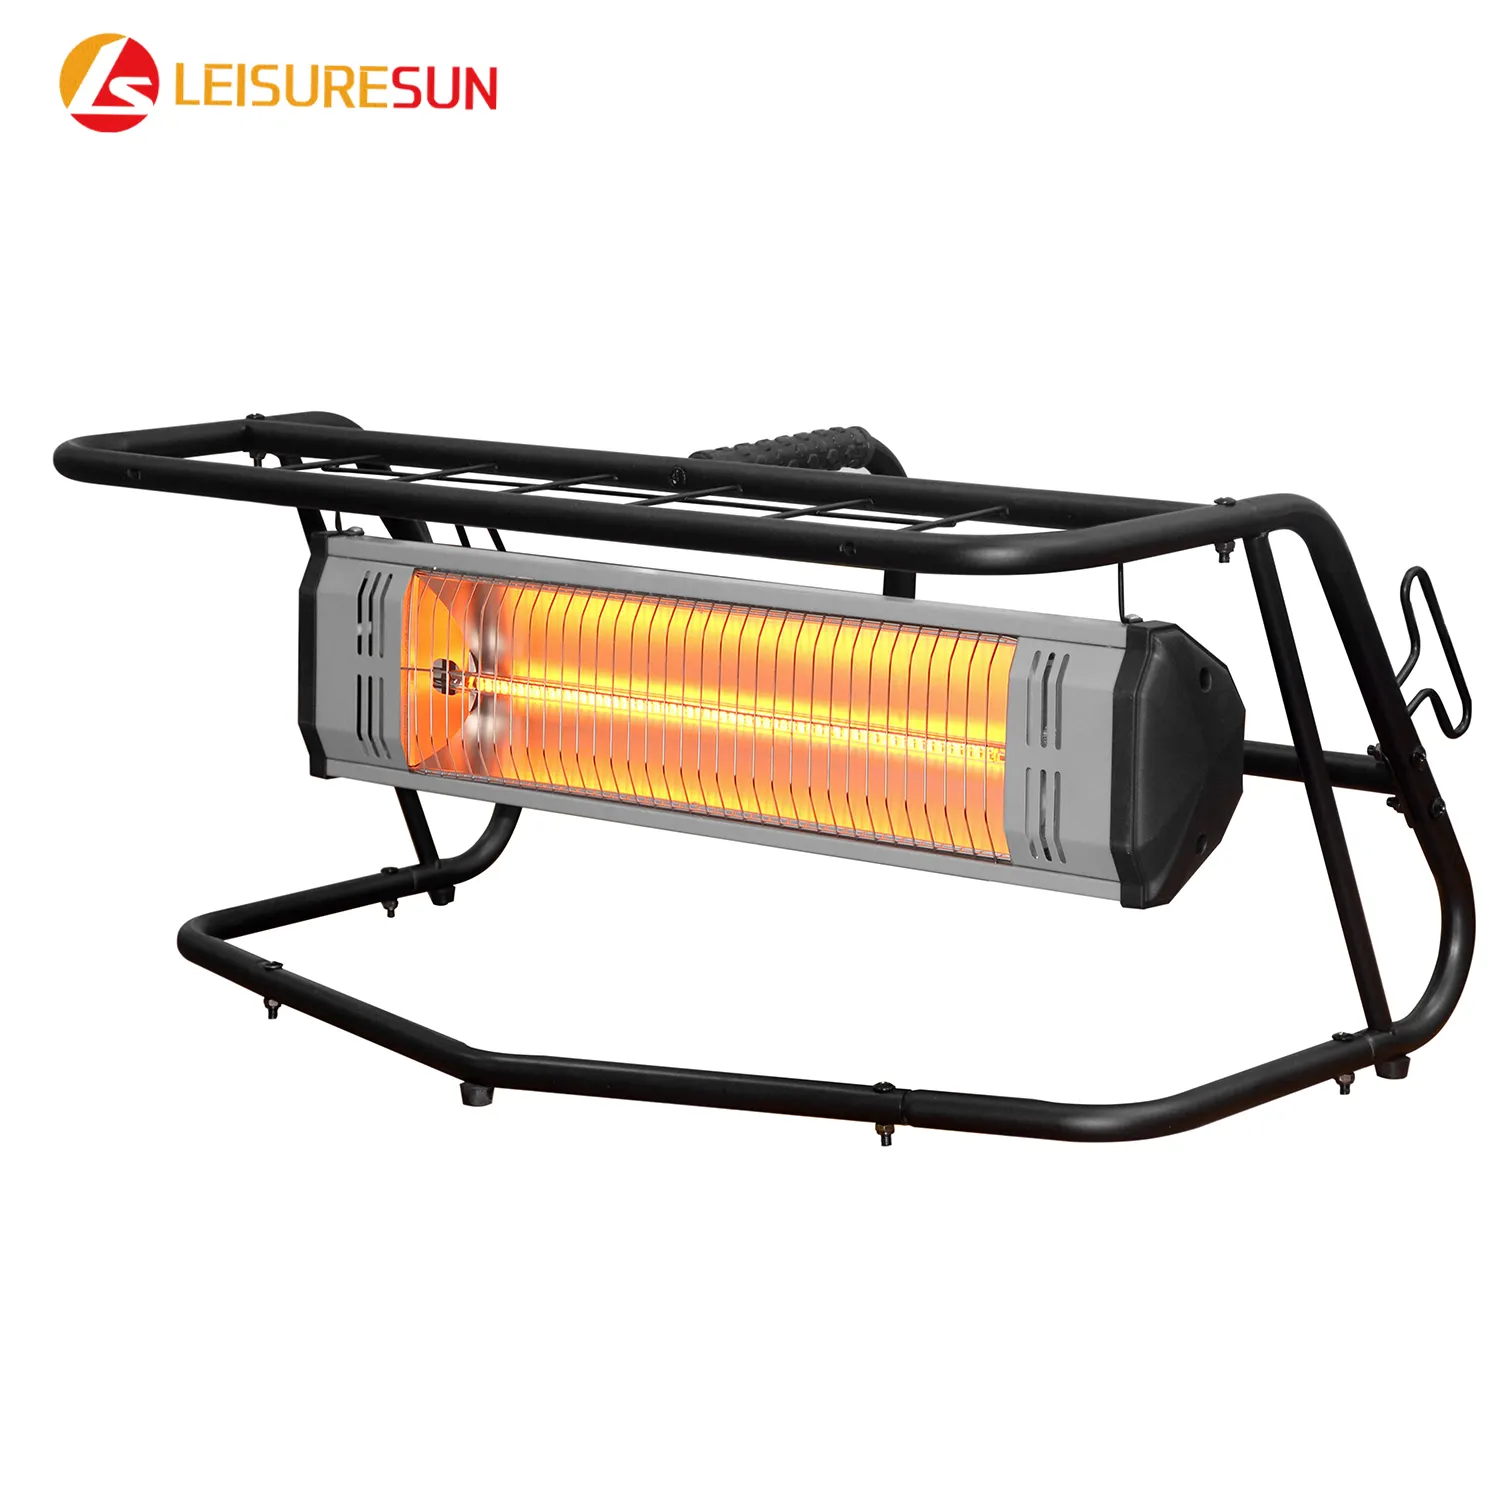 1500W Workspace outdoor heater for workshop industrial portable DIY electric infrared tent heater approved High Efficiency